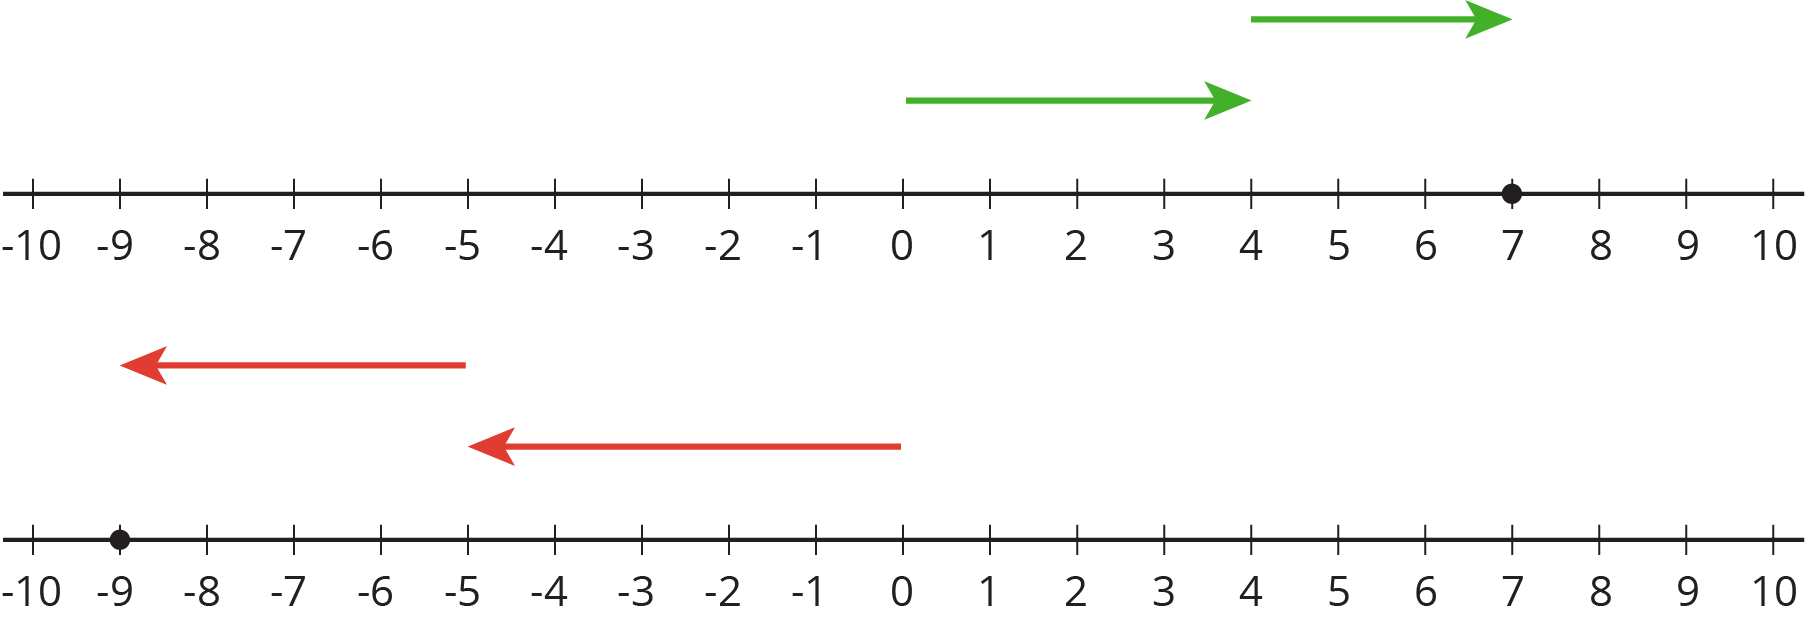 Two identical number lines with the numbers negative 10 through 10 indicated.  On the top number line, an arrow starts at 0, points to the right, and ends at 4. A second arrow starts at 4, points to the right, and ends at 7. There is a solid dot indicated at 7.  On the bottom number line, an arrow starts at 0, points to the left, and ends at negative 5. A second arrow starts at negative 5, points to the left, and ends at negative 9. There is a solid dot indicated at negative 9.